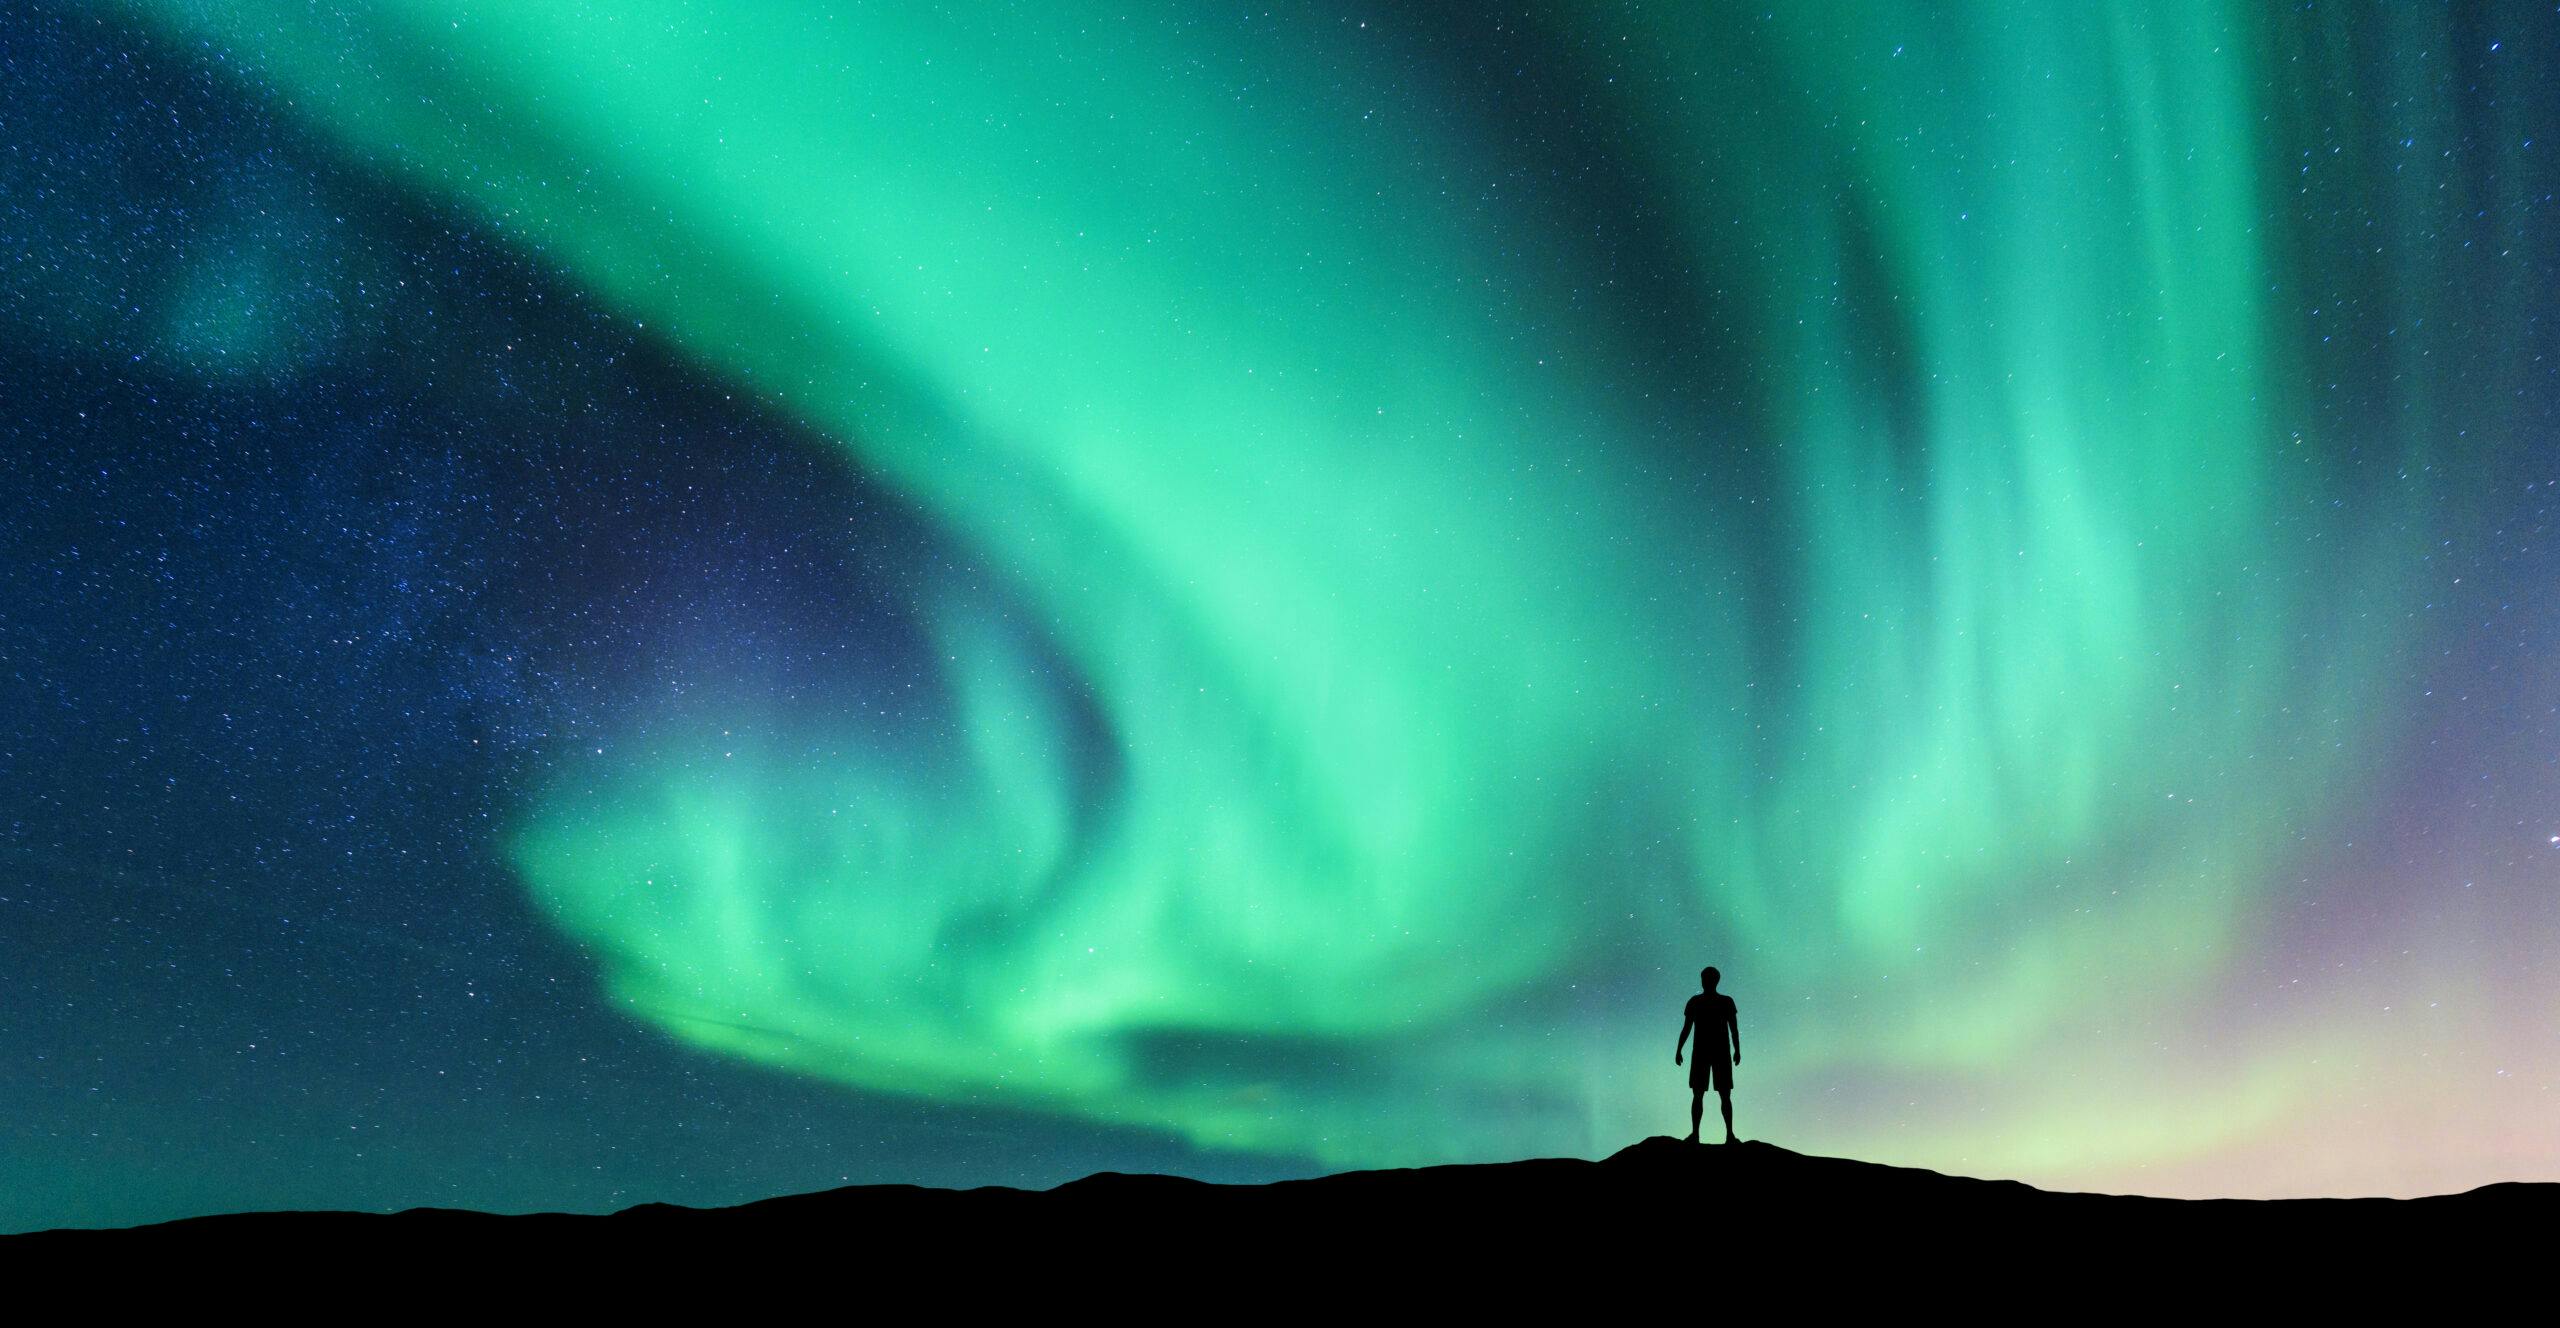 Chasing the Northern Lights: Top 15 Places to See the Aurora